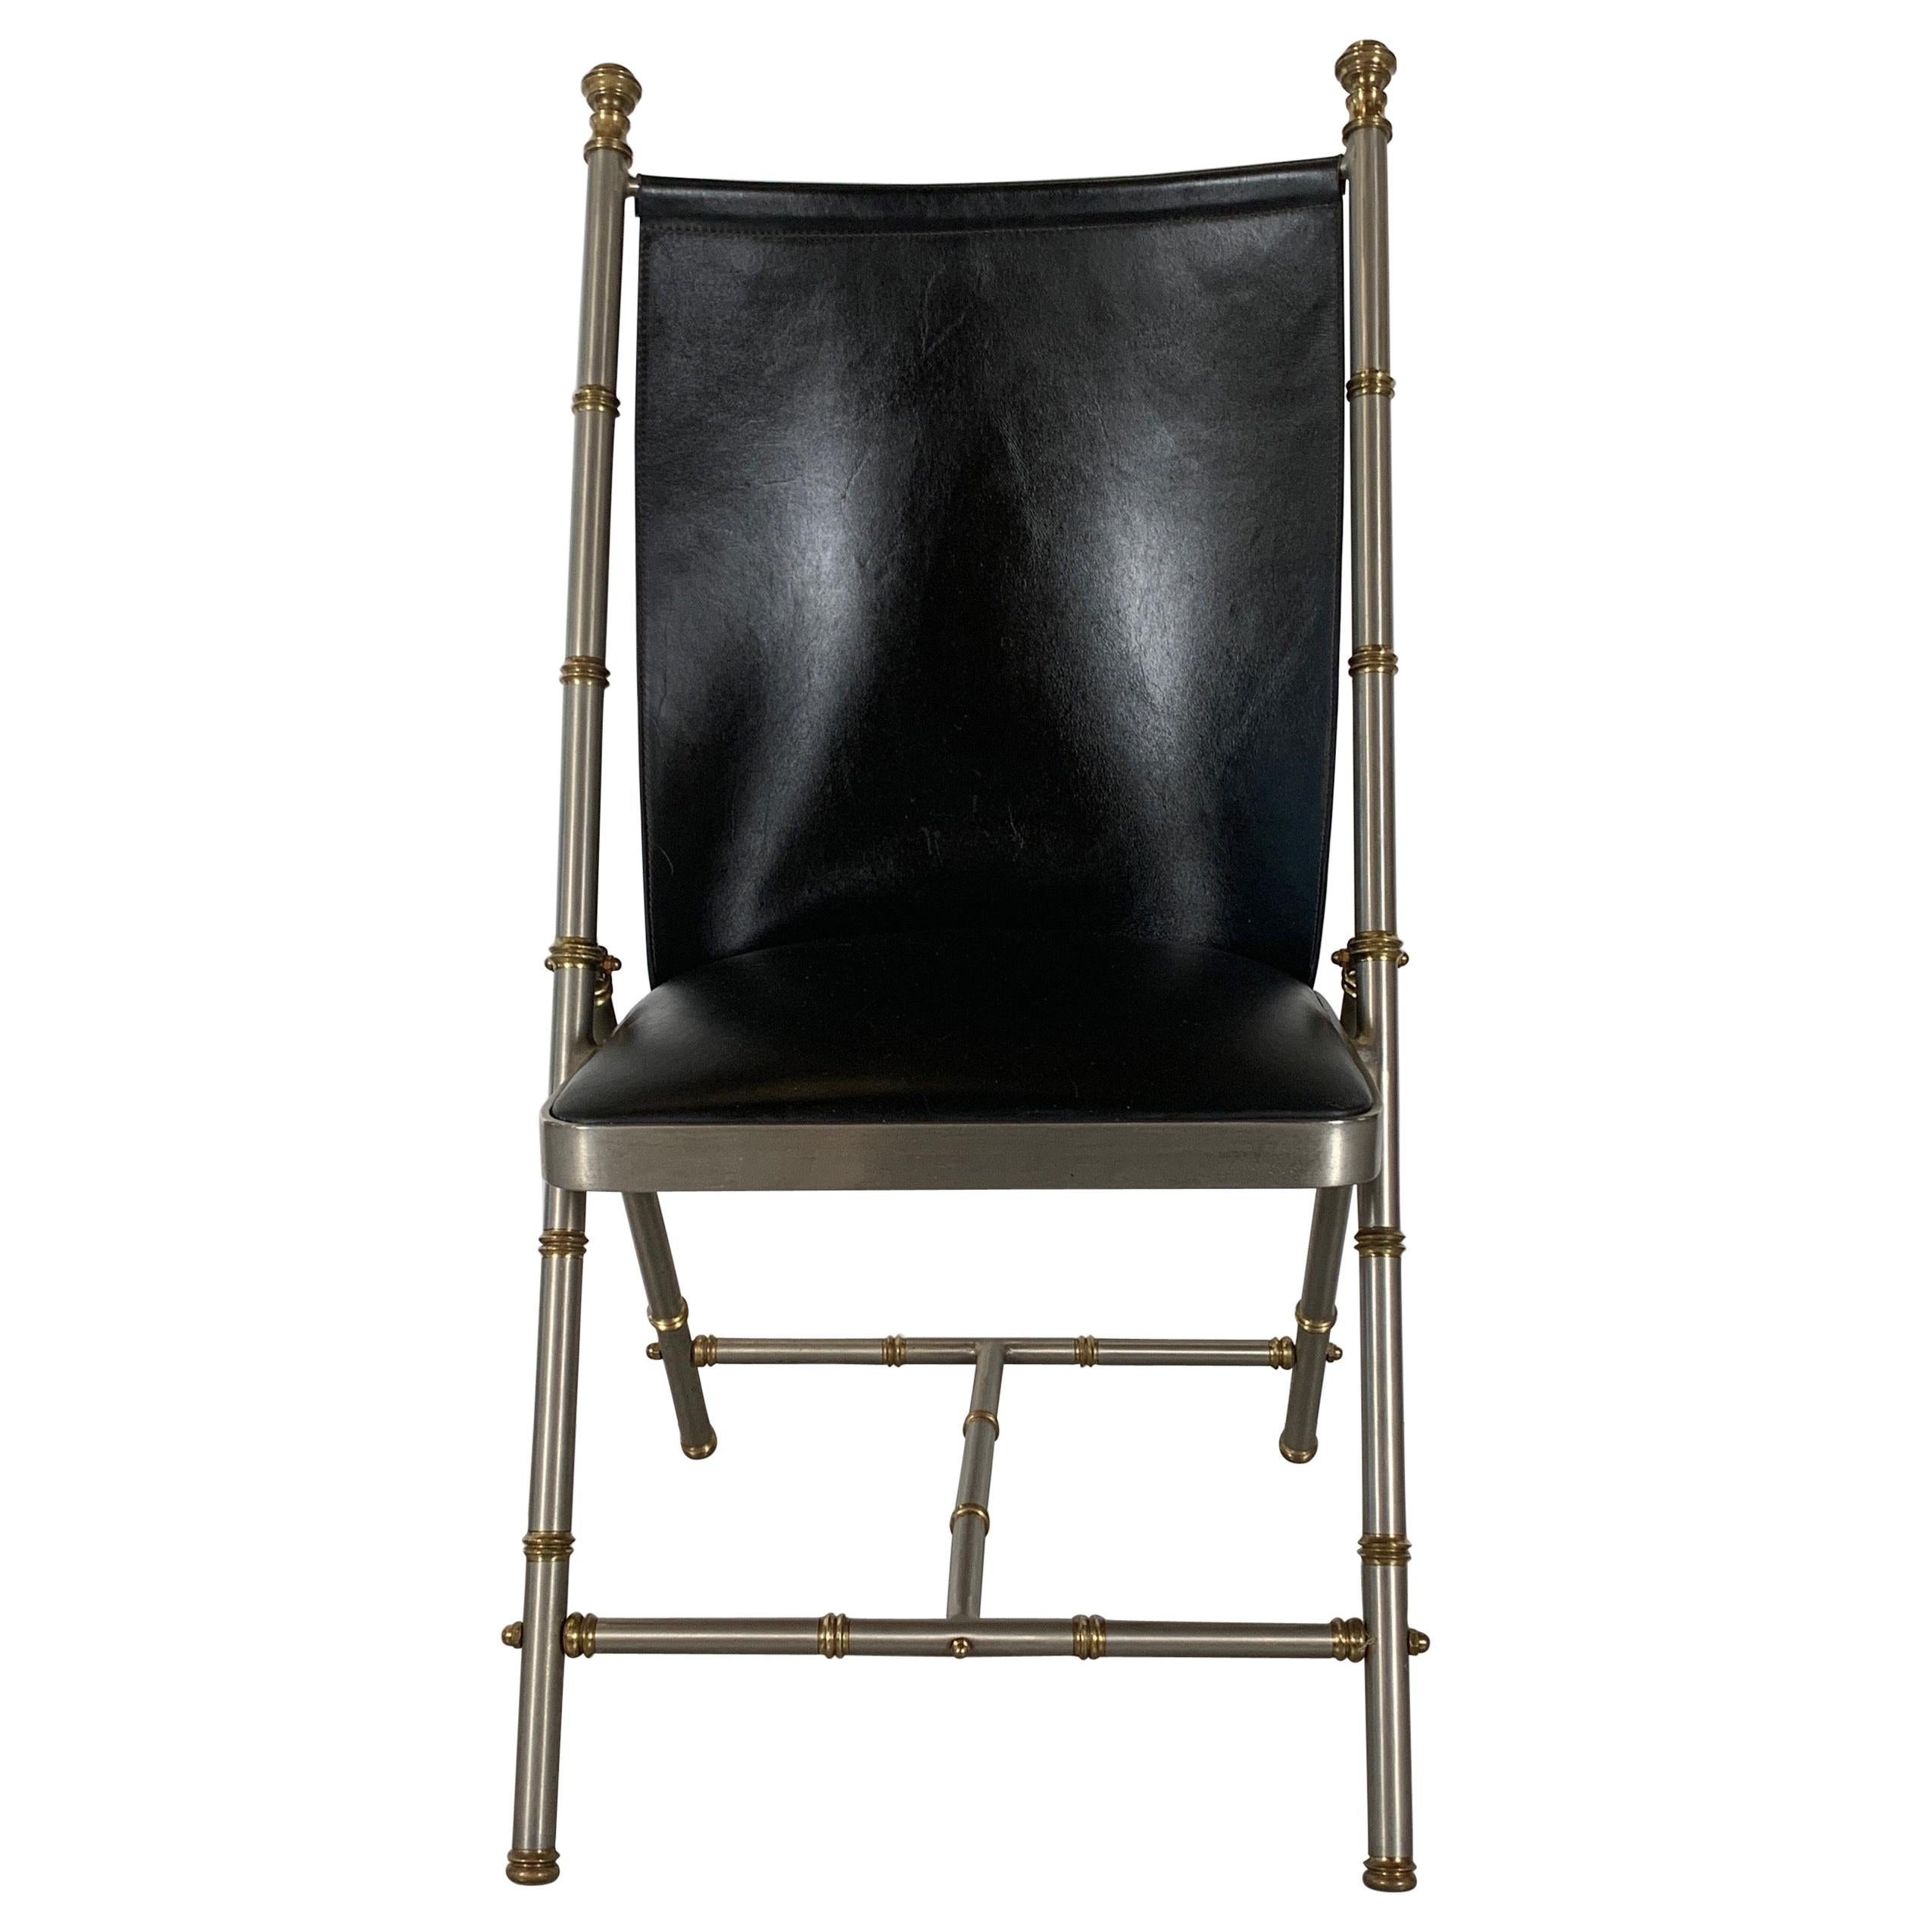 Brushed Steel and Brass Campaign Style Chair with Leather